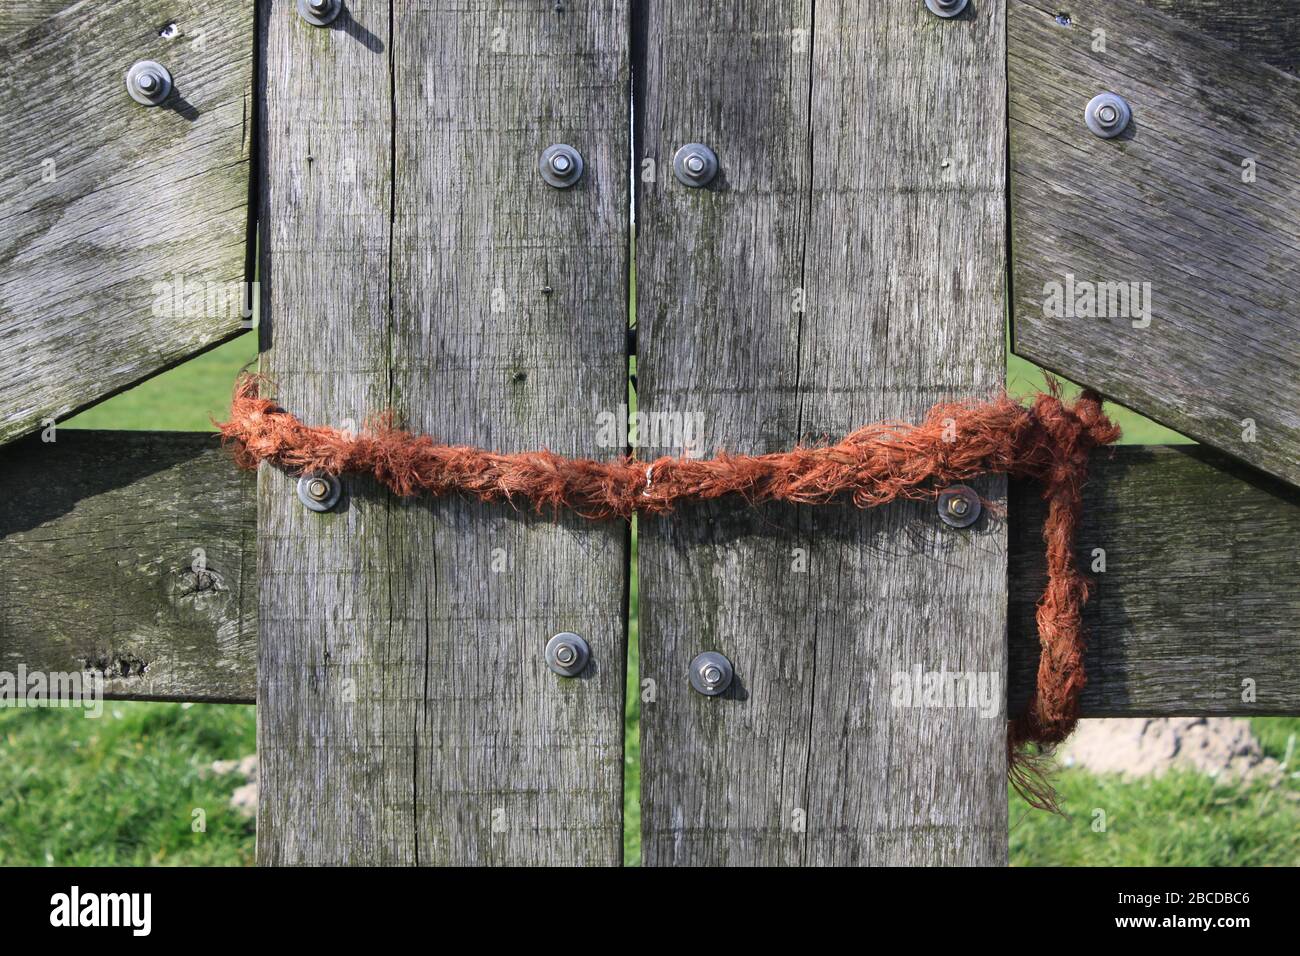 Wooden fence of a farm with orange rope around it no access Stock Photo